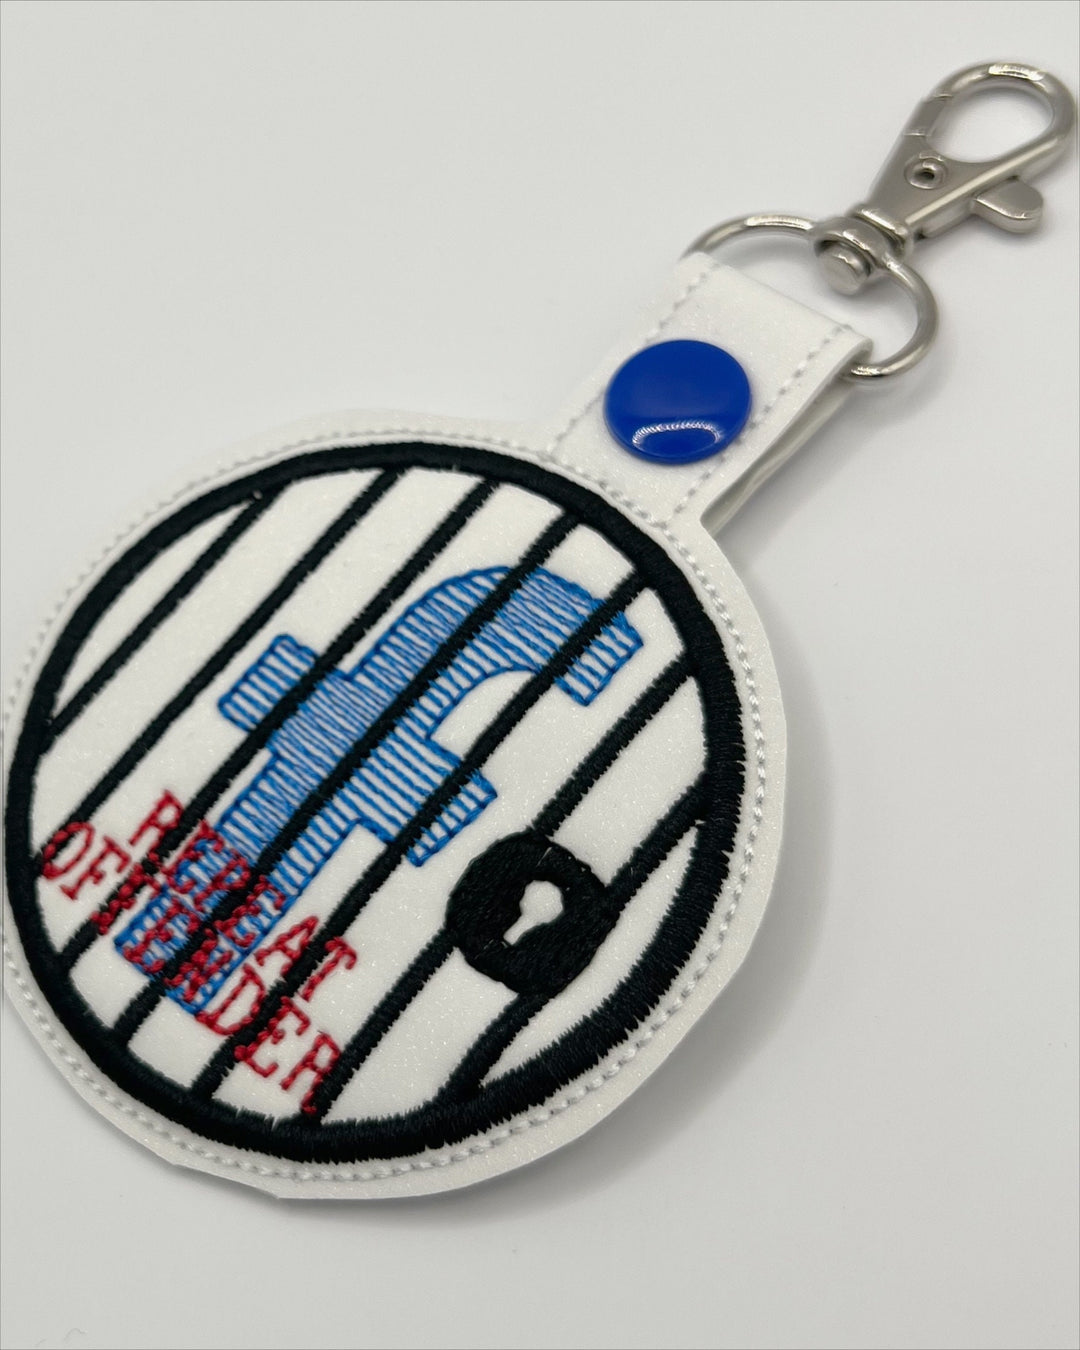 Facebook Jail Repeat Offender Keychain